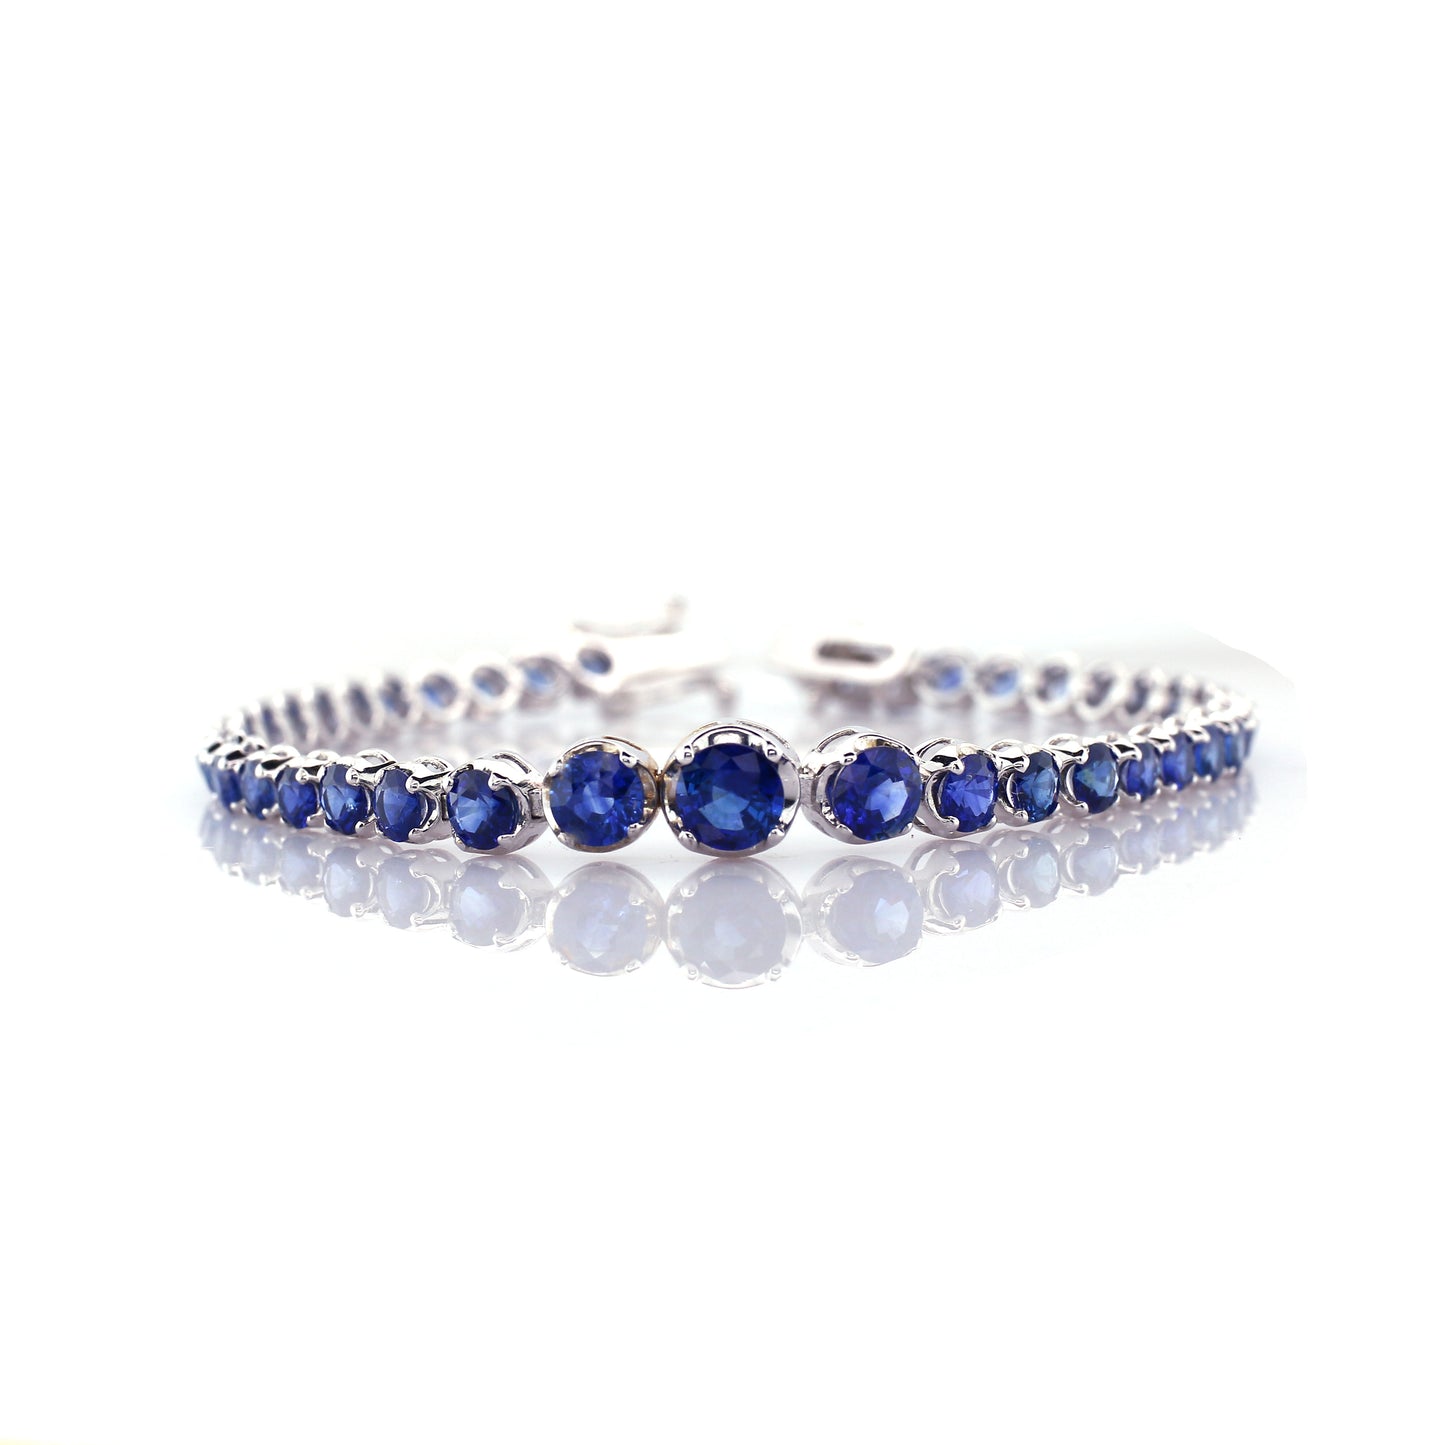 GORGEOUS BLUE SAPPHIRE  BRACELET FOR ALL OCCASIONS